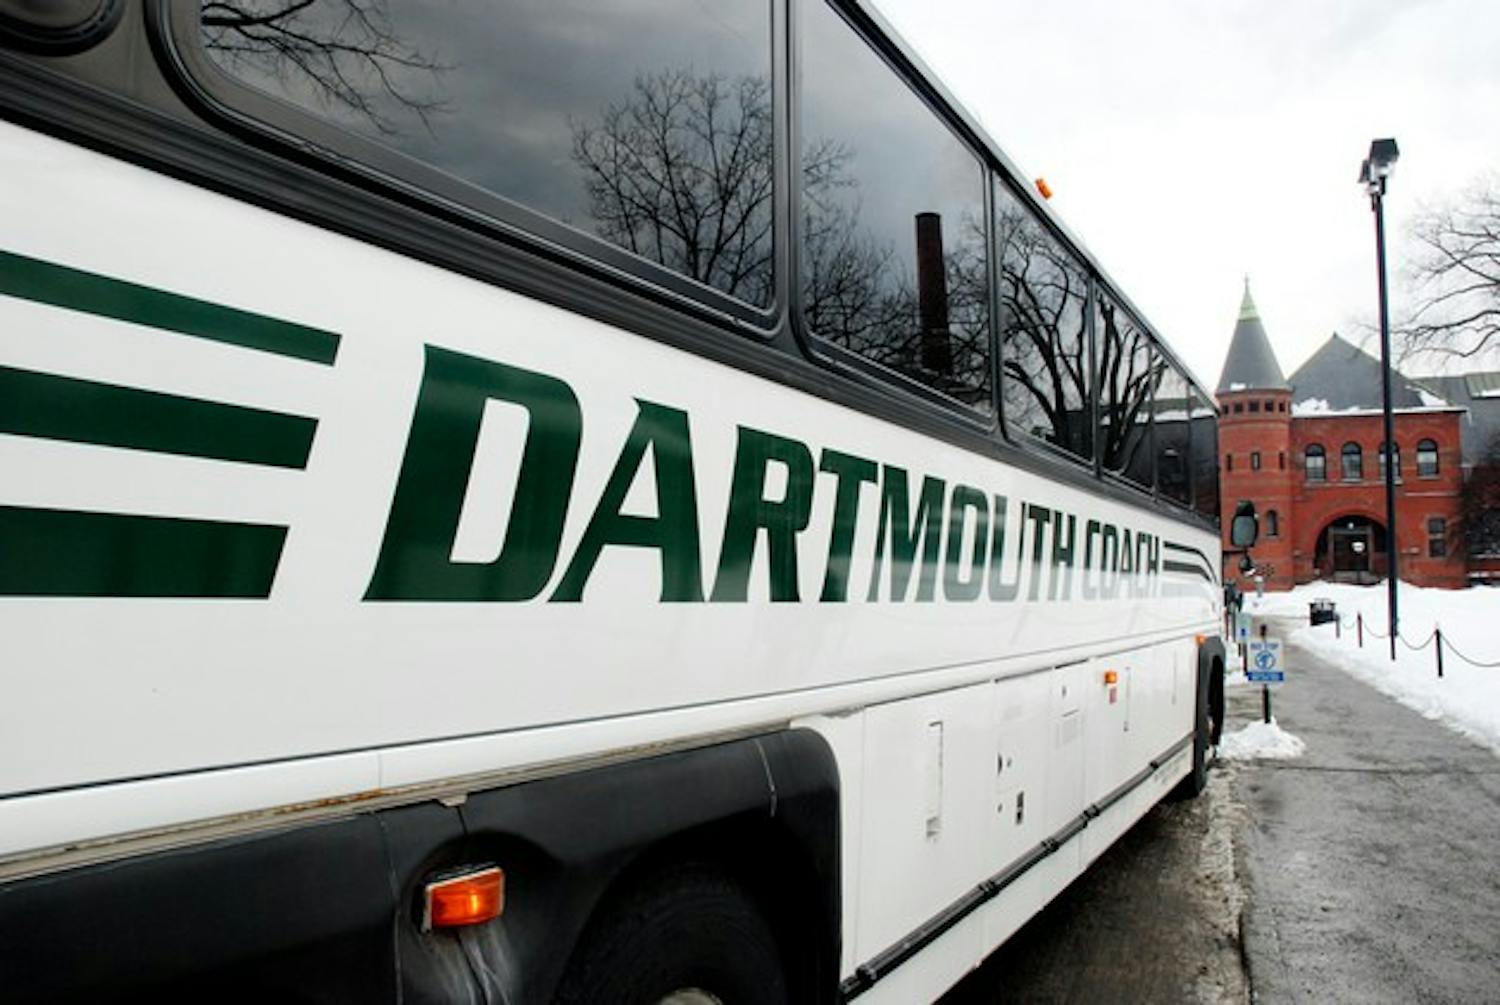 The Dartmouth Coach will begin offering service to New York City on March 2. Round-trip tickets will cost $149.